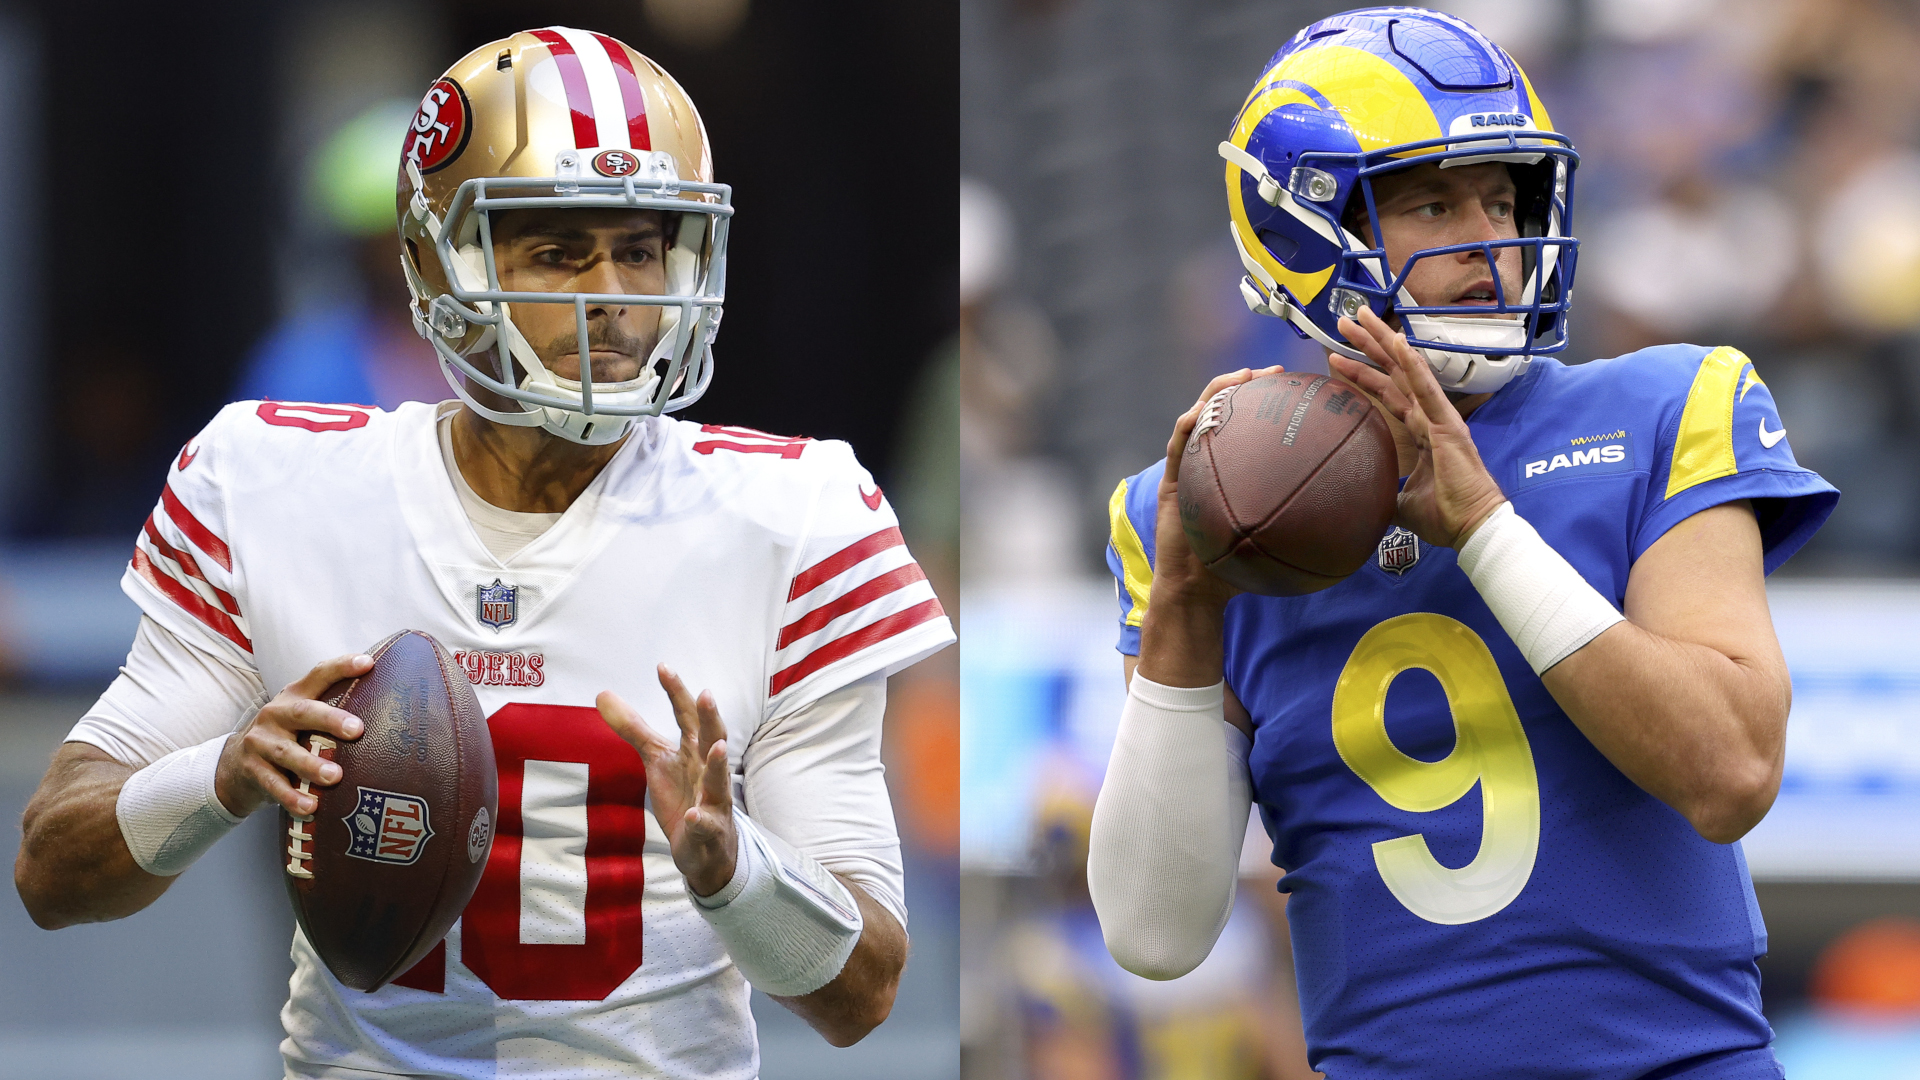 49ers vs. Rams live stream: TV channel, how to watch